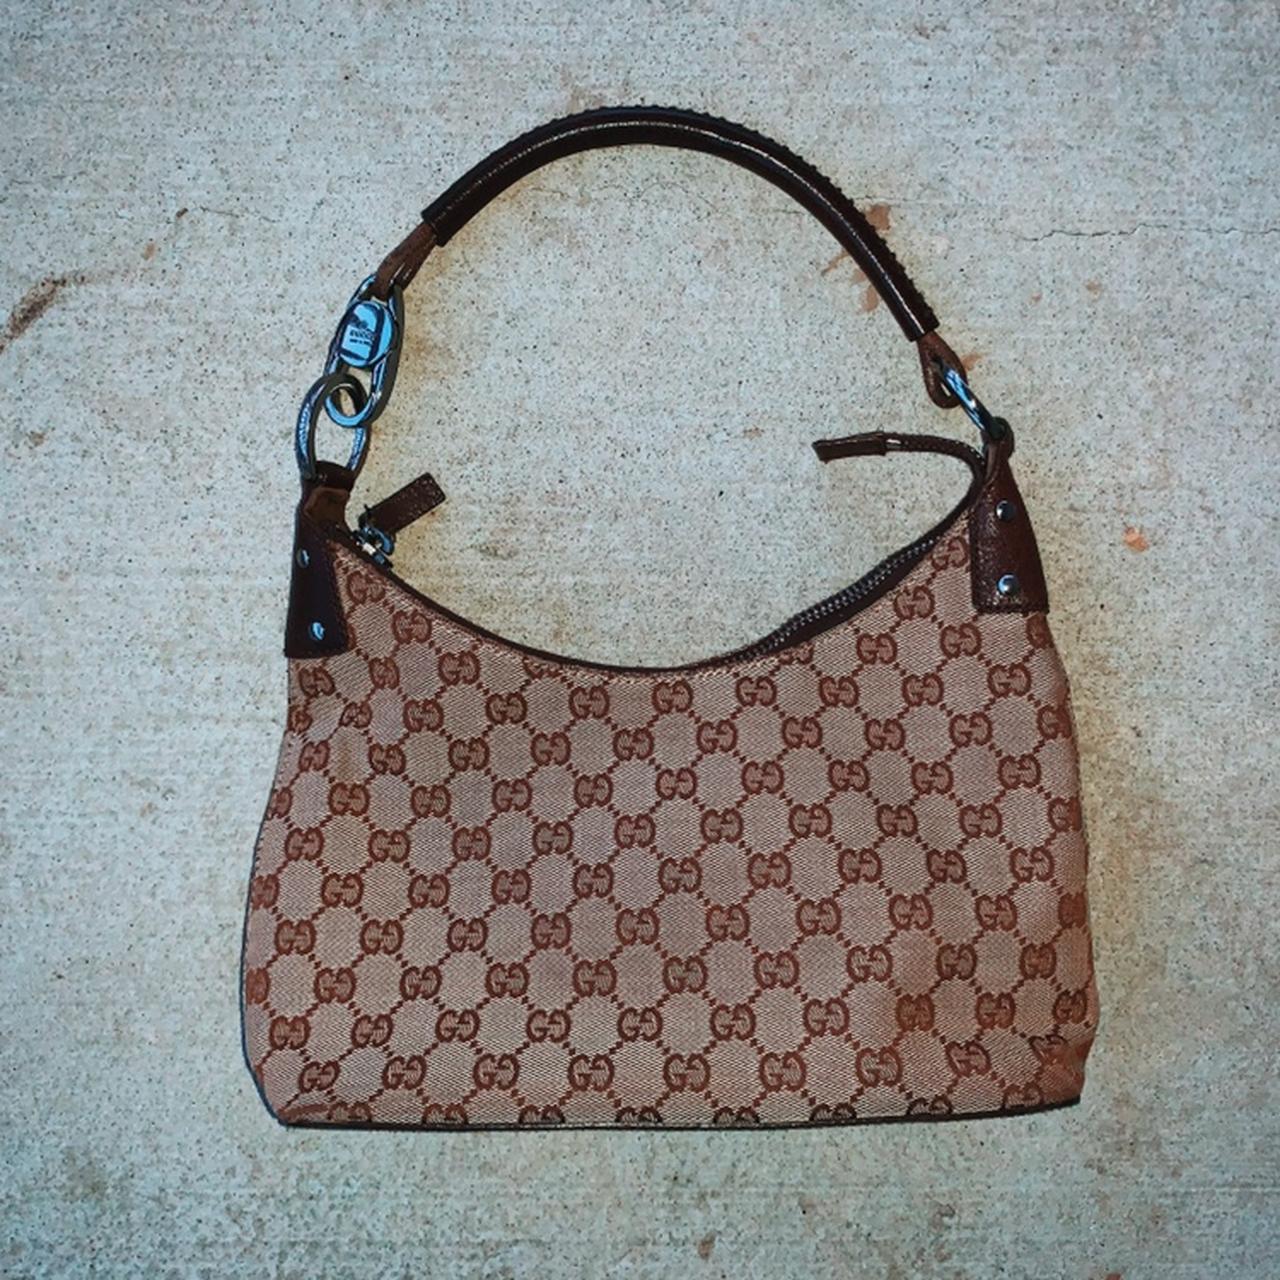 Early 2000’s Gucci shoulder bag , 11.5 inches wide, 6